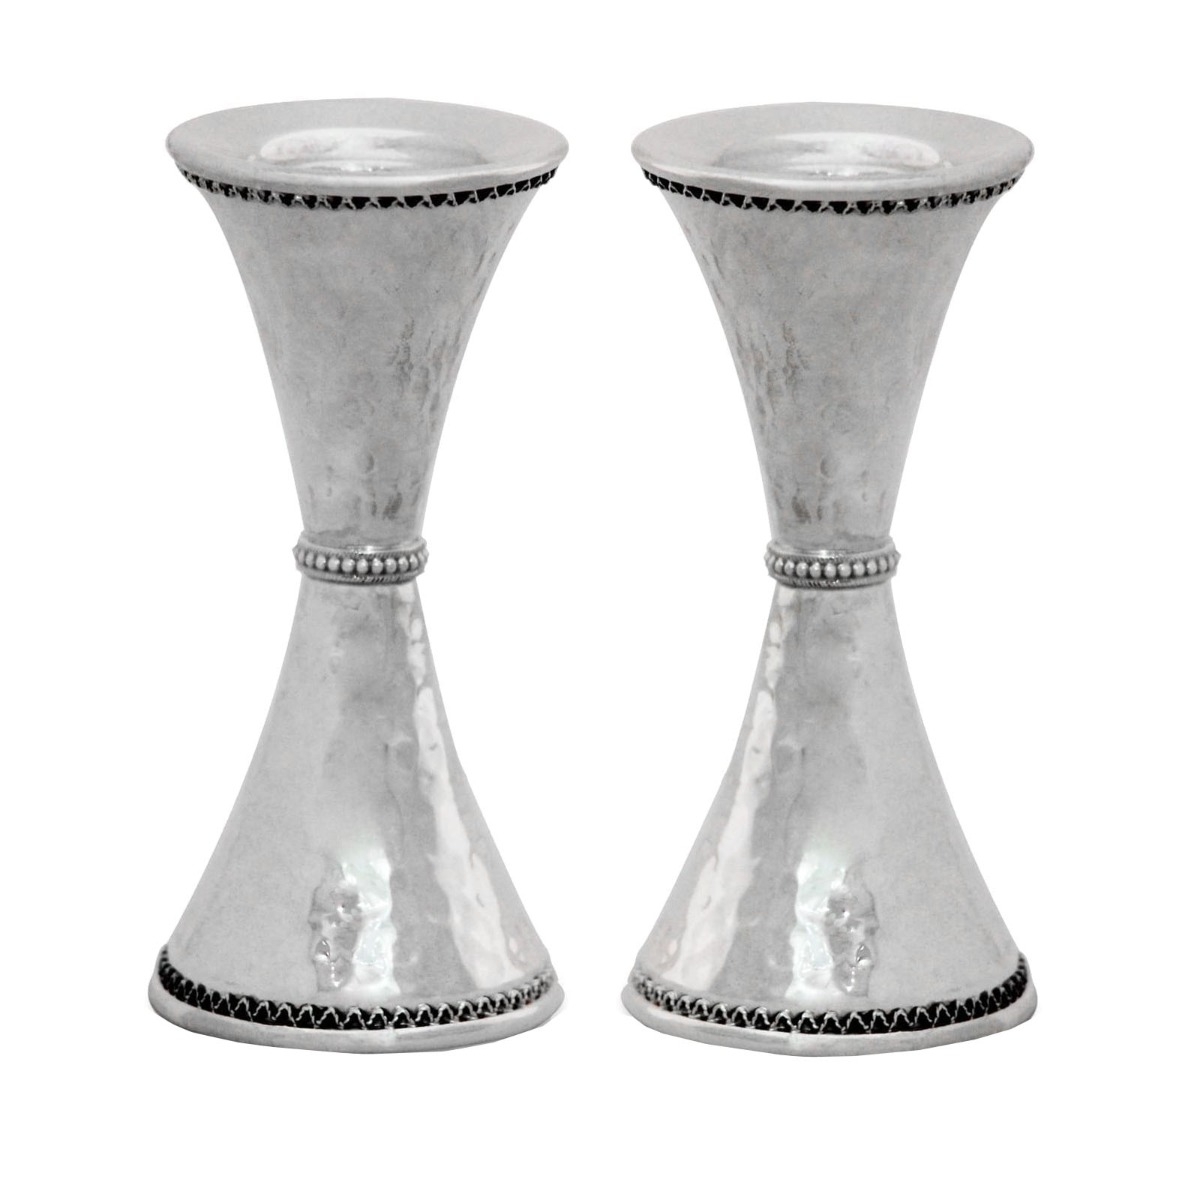 Tapered Sterling Silver Candlesticks - 1